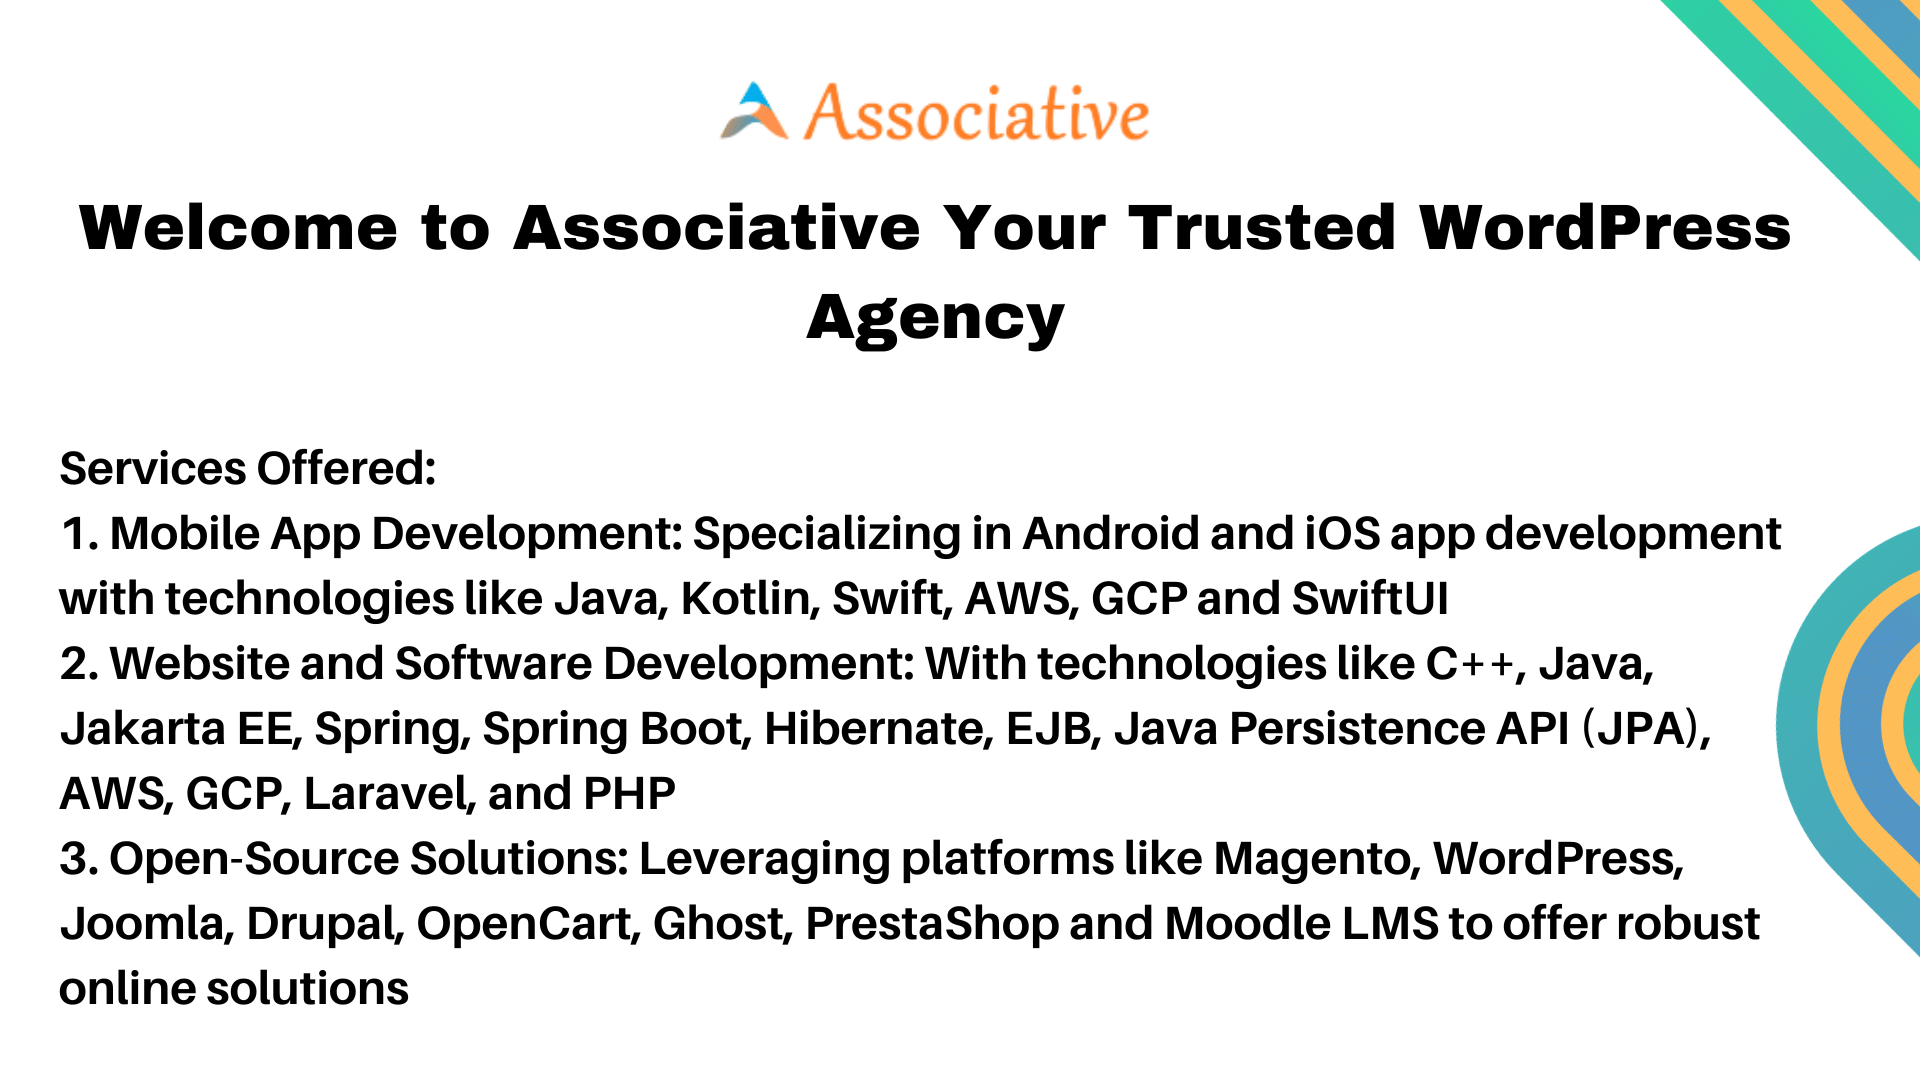 Welcome to Associative Your Trusted WordPress Agency